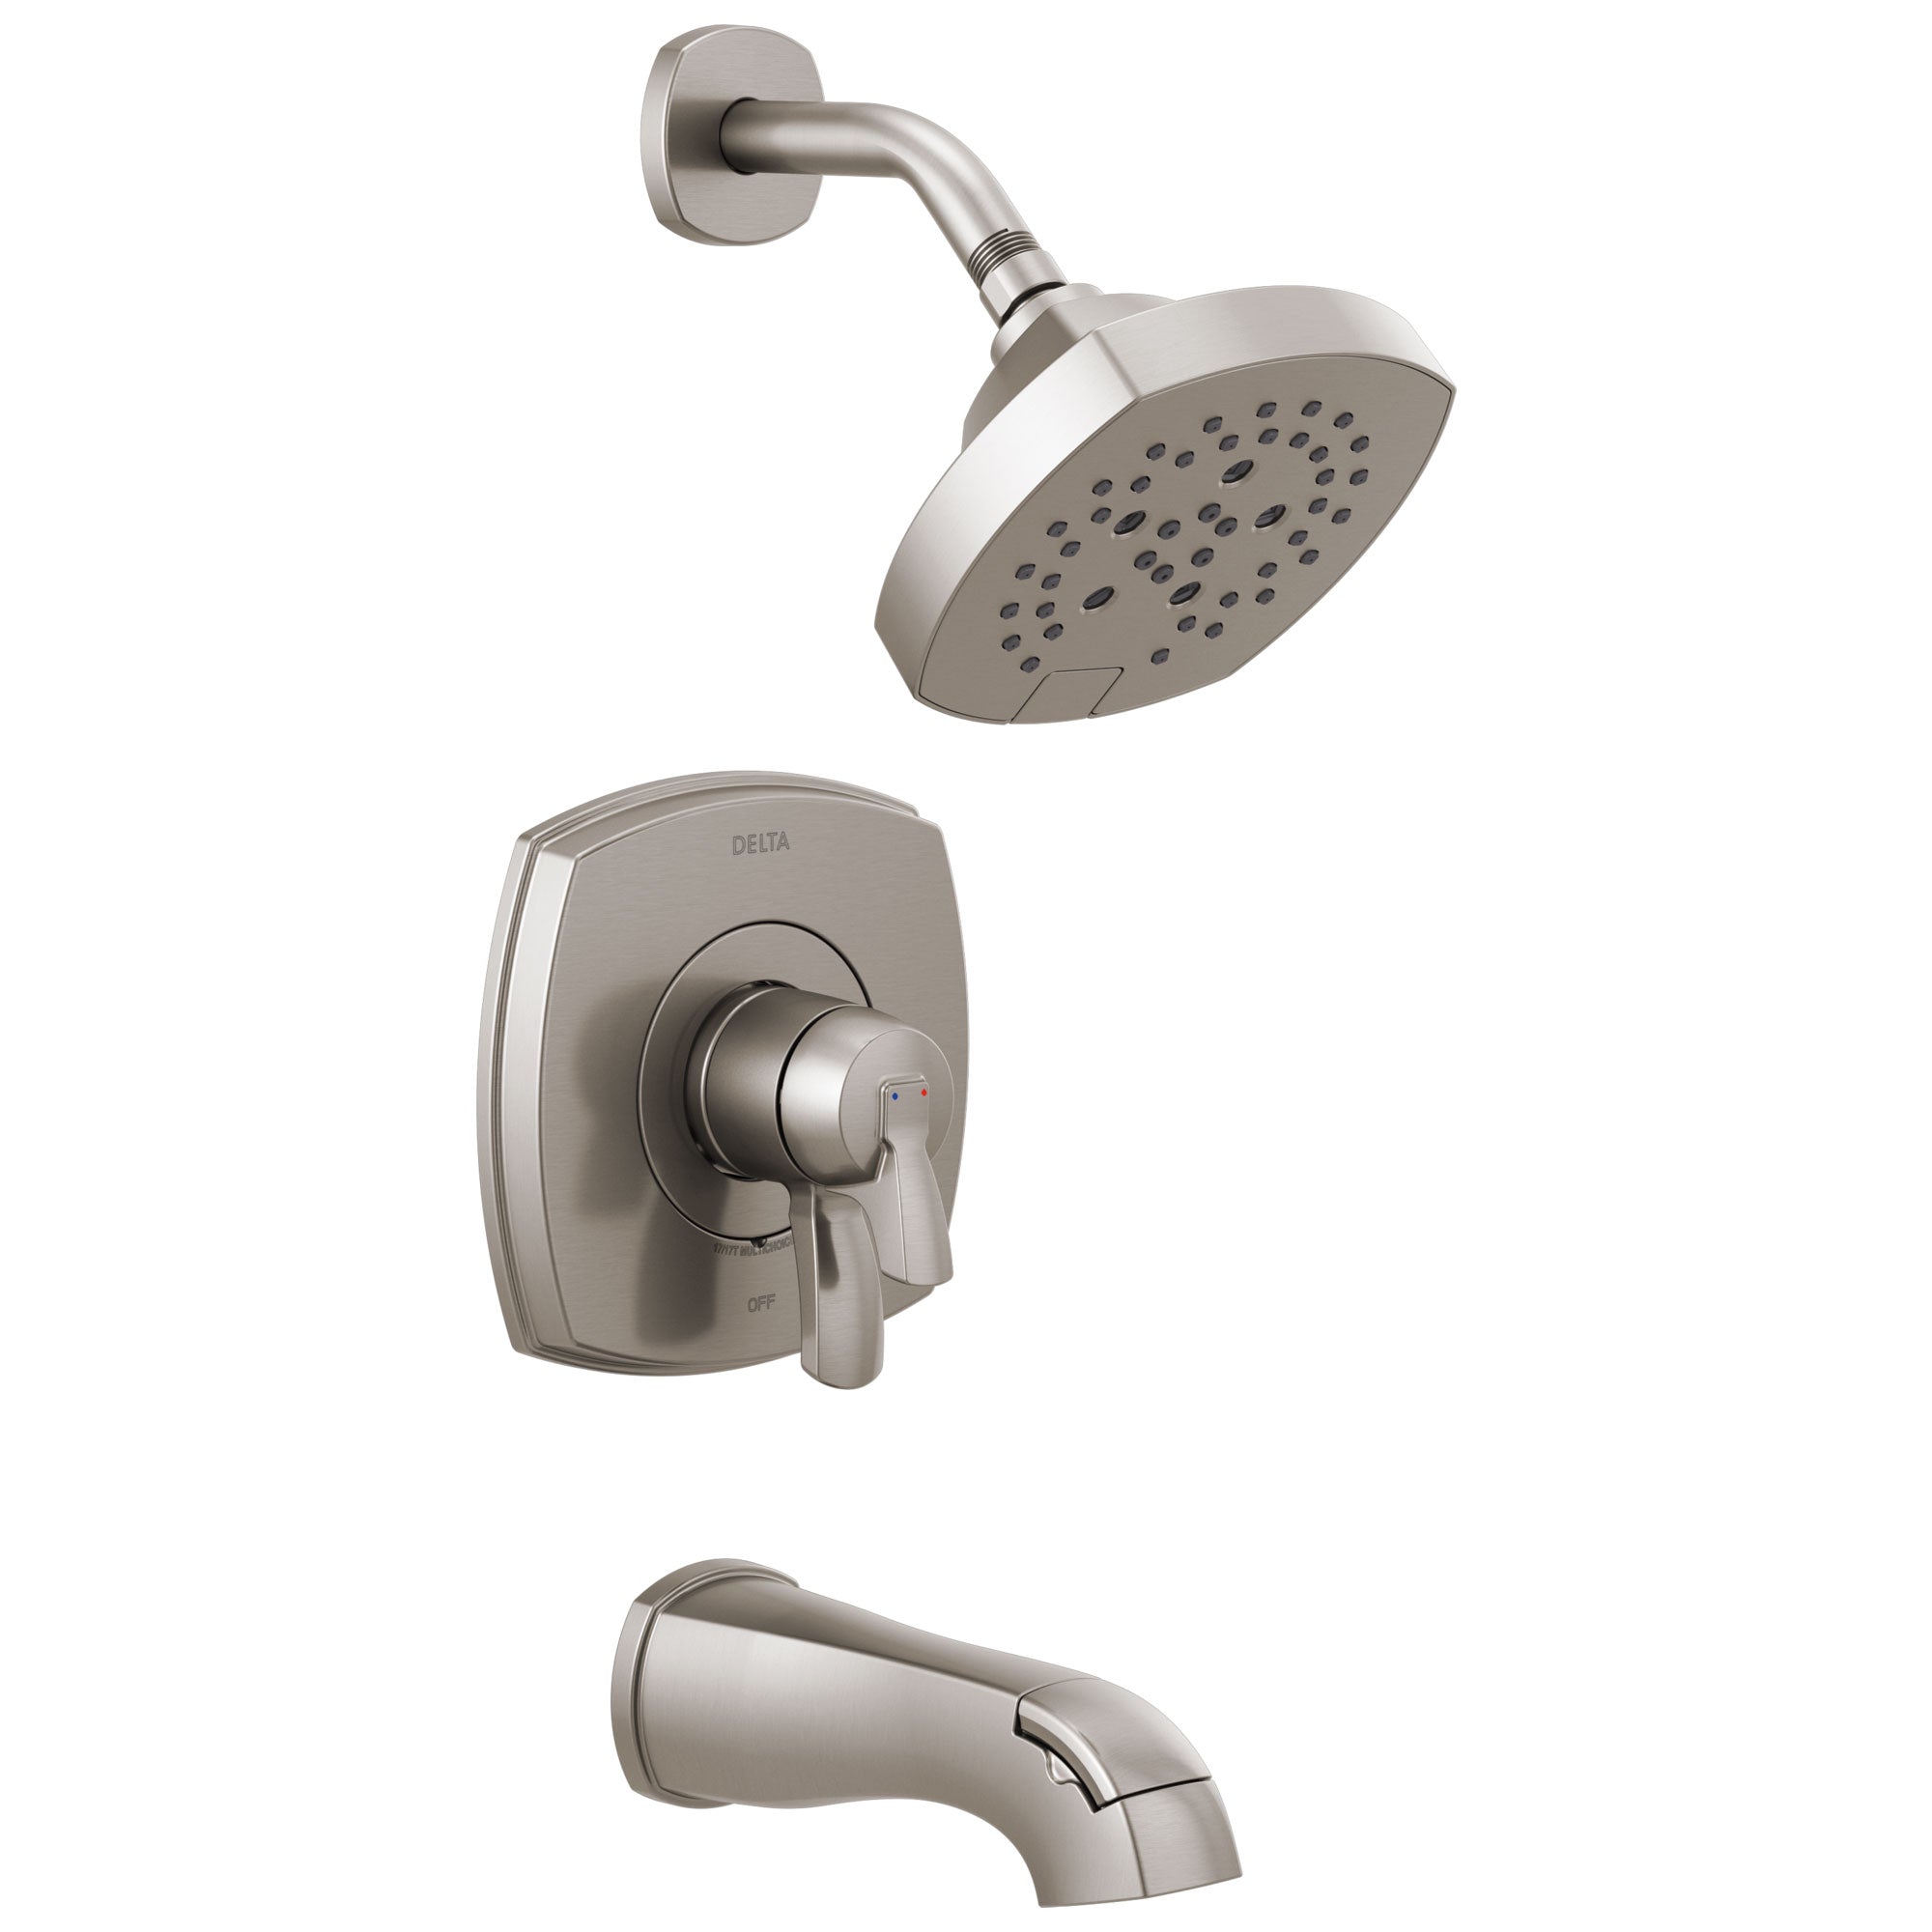 Delta Stryke Stainless Steel Finish 17 Series Tub and Shower Combo Faucet Includes Handles, Cartridge, and Rough Valve without Stops D3329V